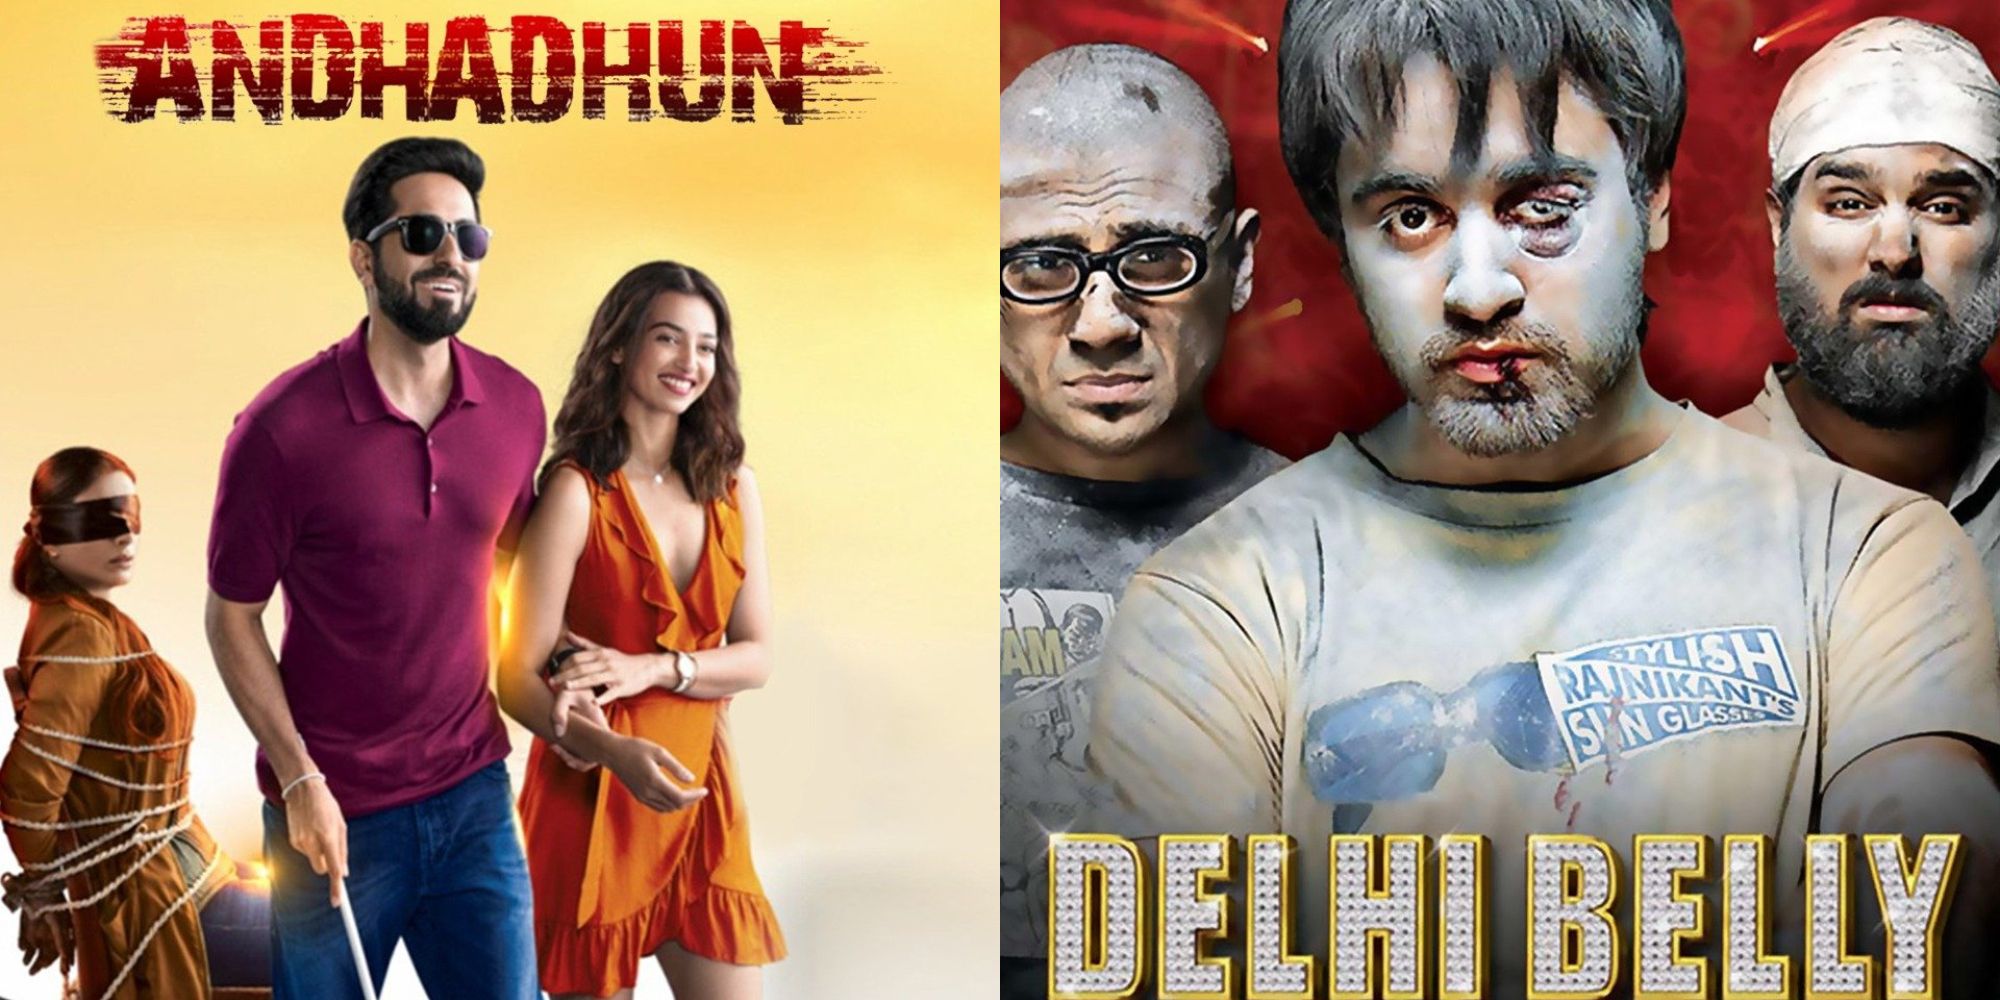 Split image showing posters for Andhadhun and Delhi Belly.